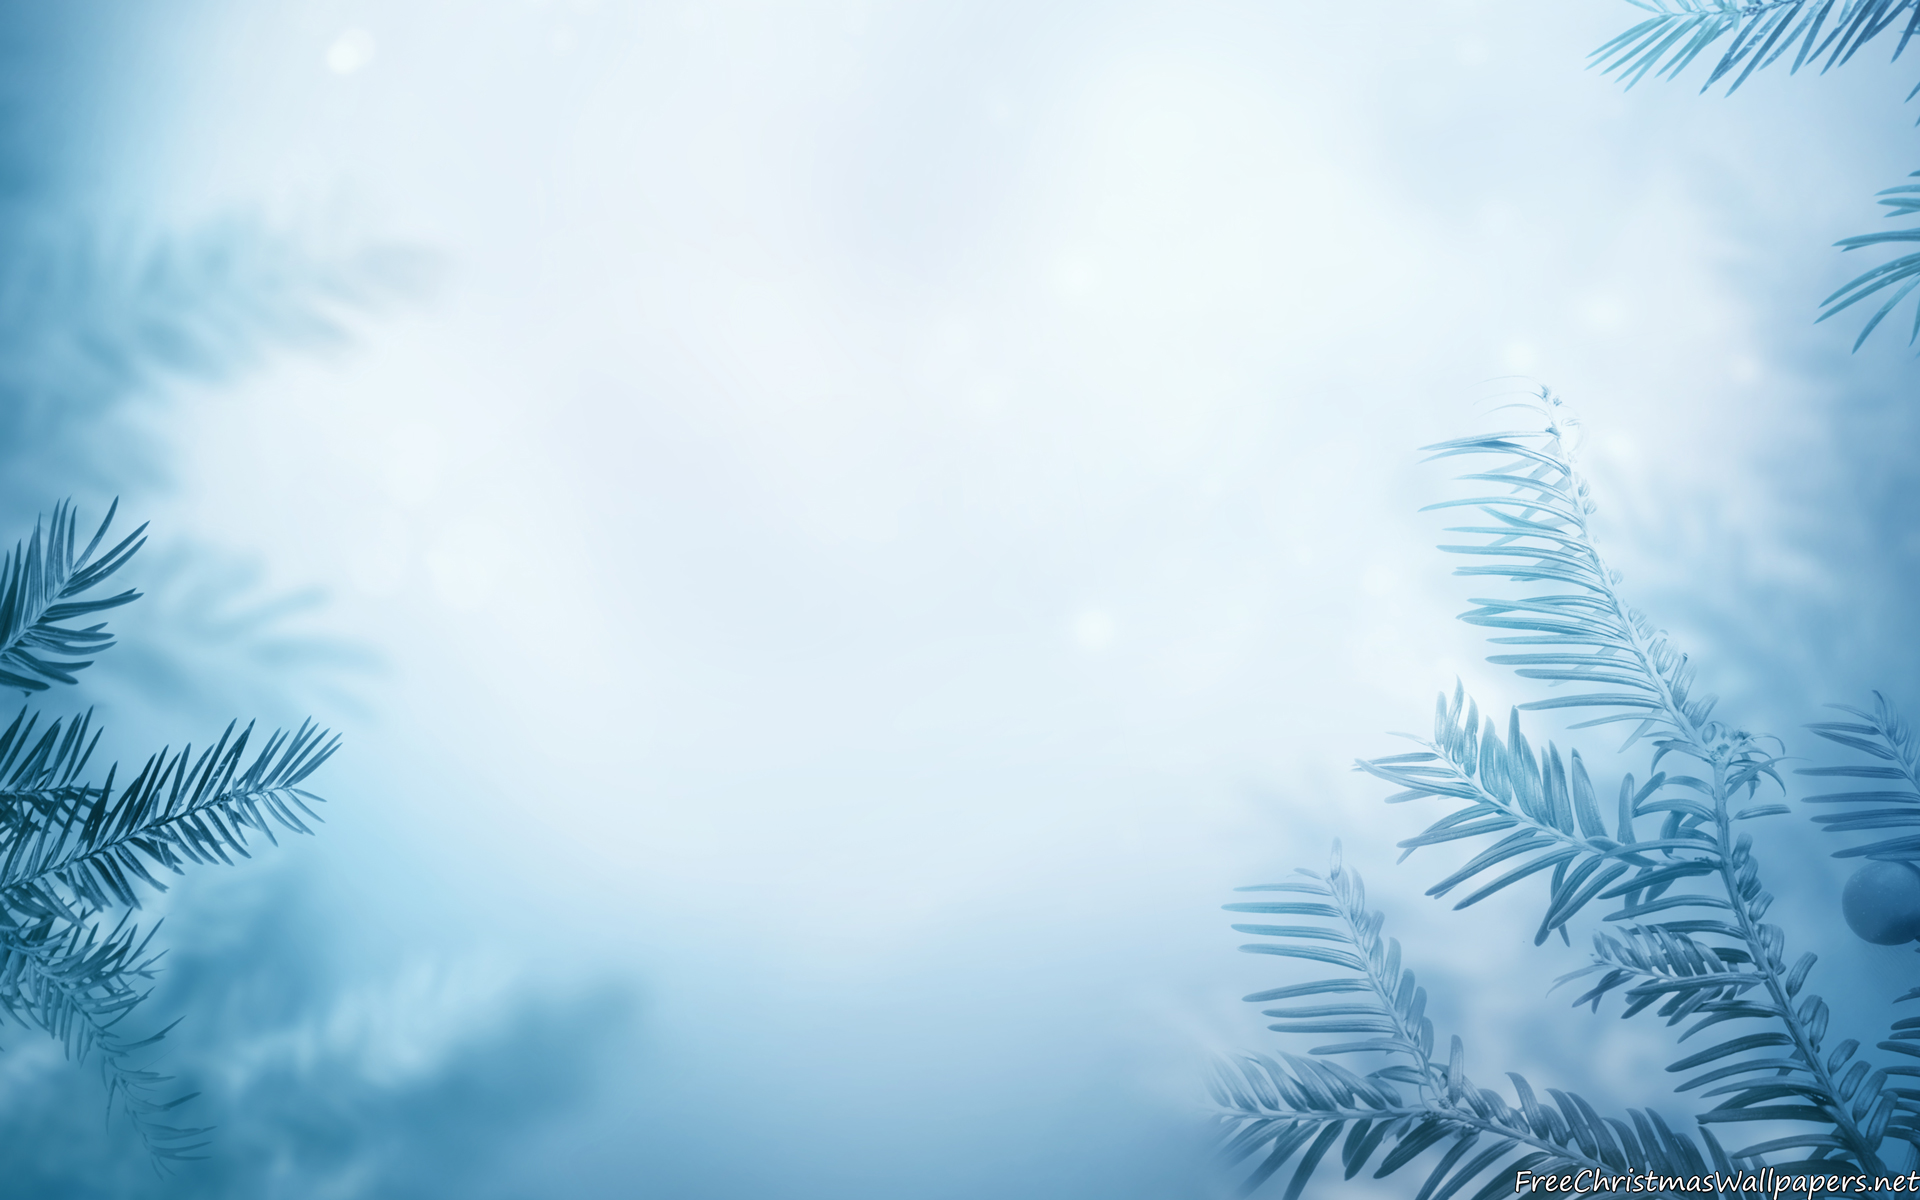 free clipart winter background - photo #43